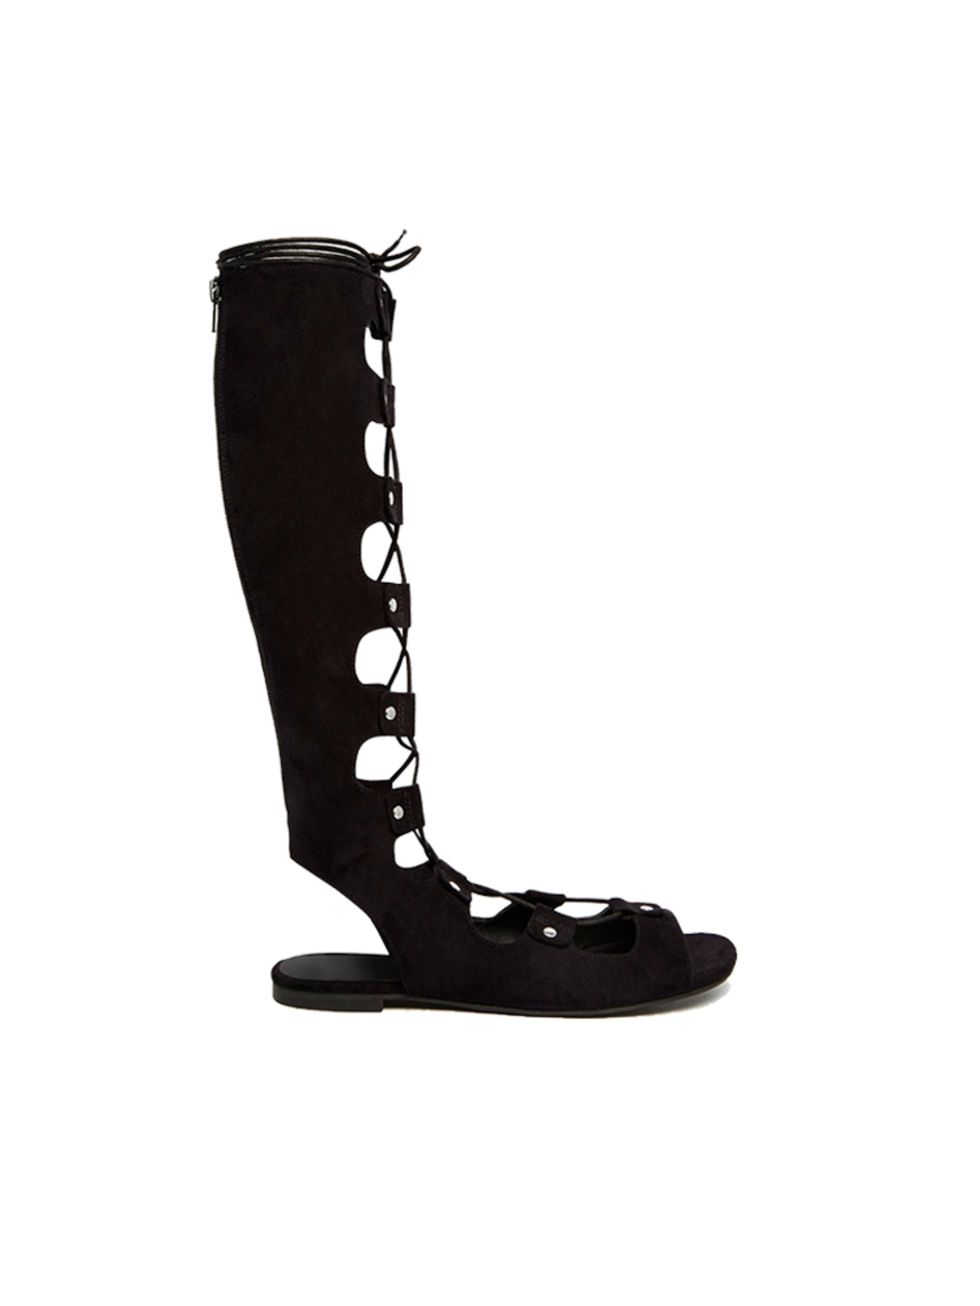 <p><a href="http://www.asos.com/ASOS/ASOS-FEODORA-Knee-High-Lace-Up-Sandals/Prod/pgeproduct.aspx?iid=5220091&cid=17170&sh=0&pge=0&pgesize=36&sort=-1&clr=Black&totalstyles=219&gridsize=3" target="_blank">ASOS</a> gladiator sandals, £45</p>